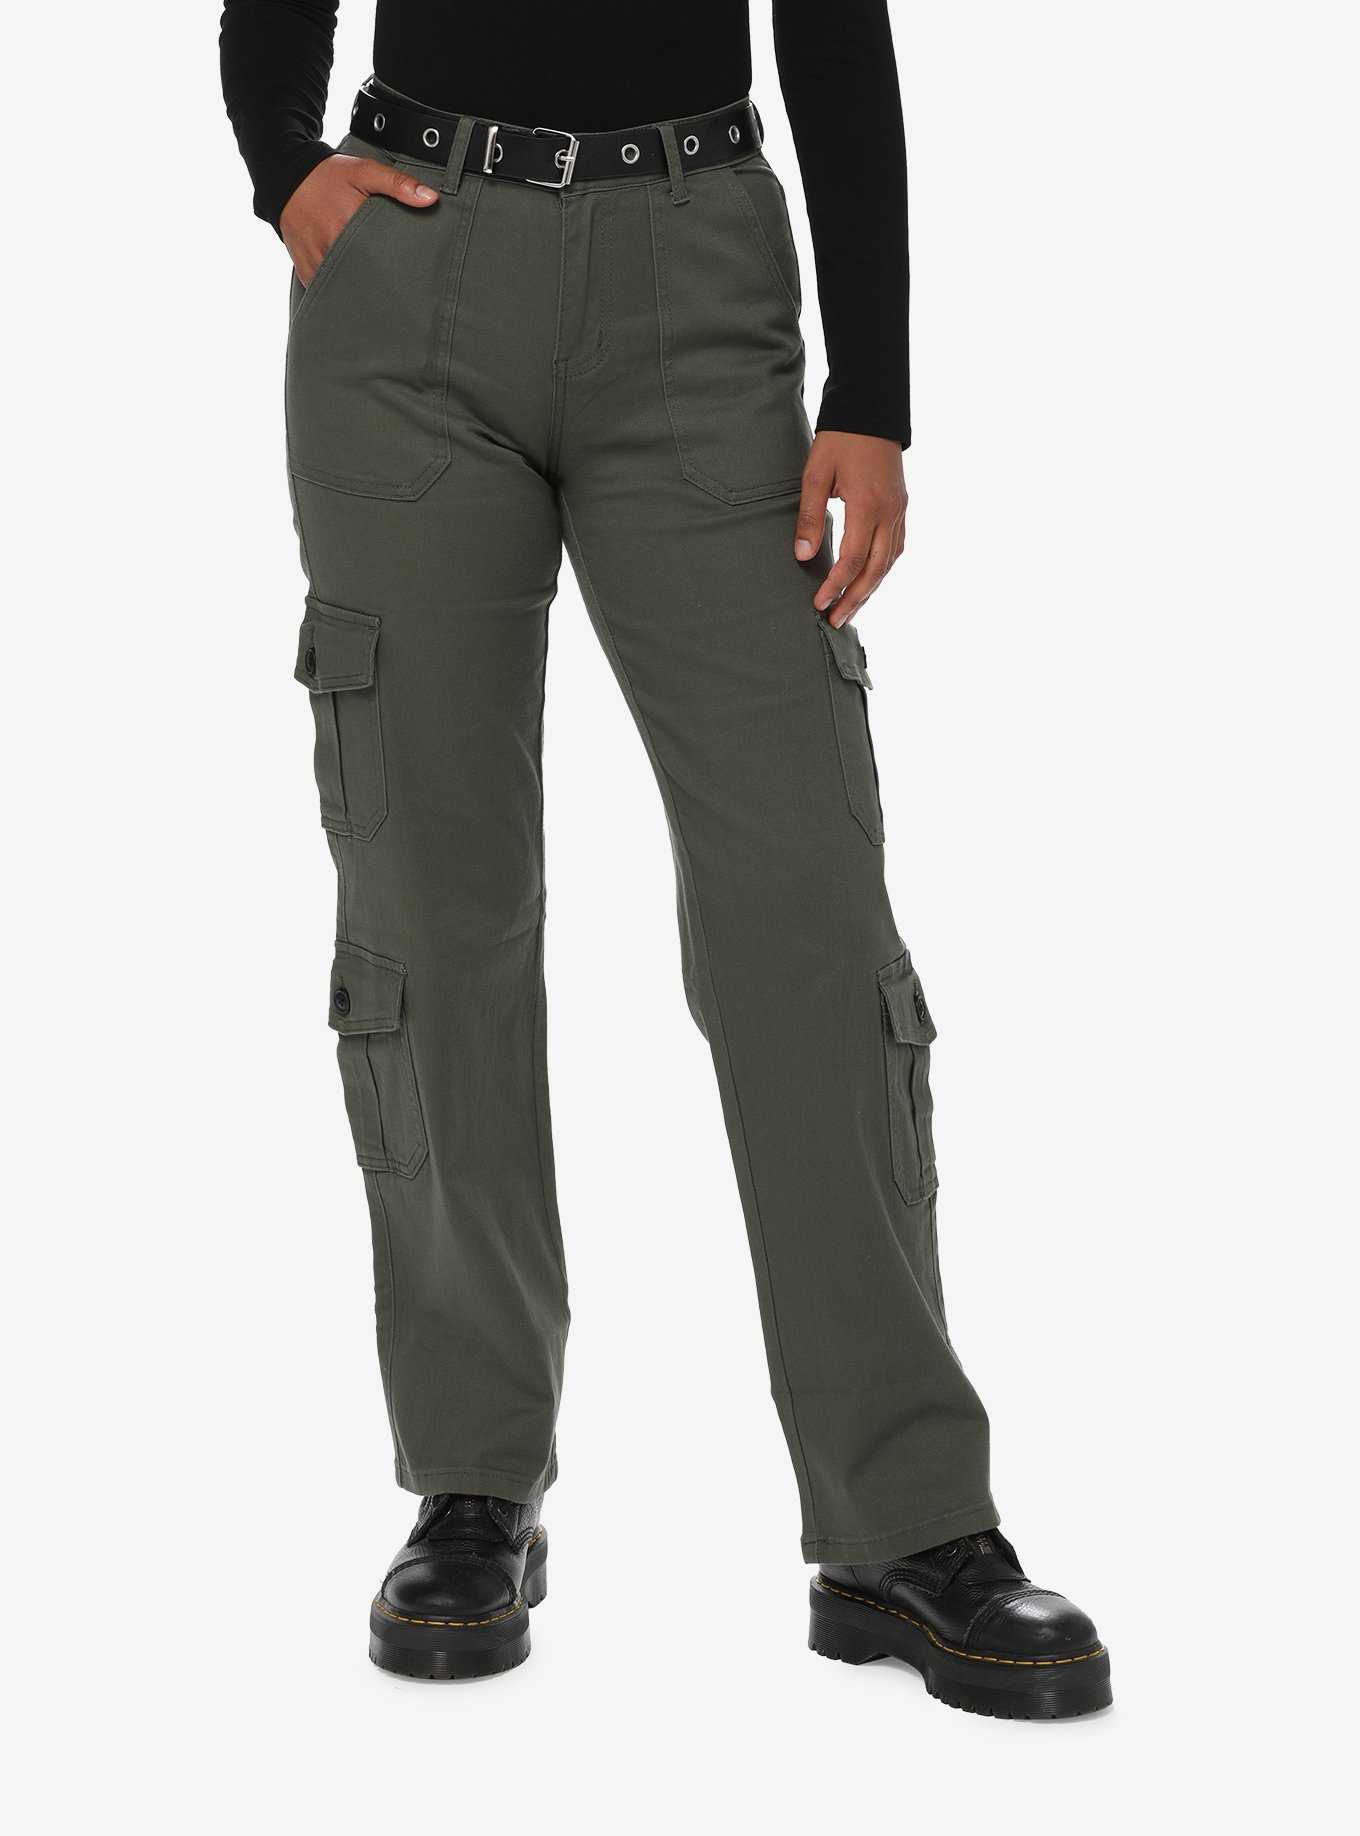 Hot Topic Gray Cargo Pants for Women